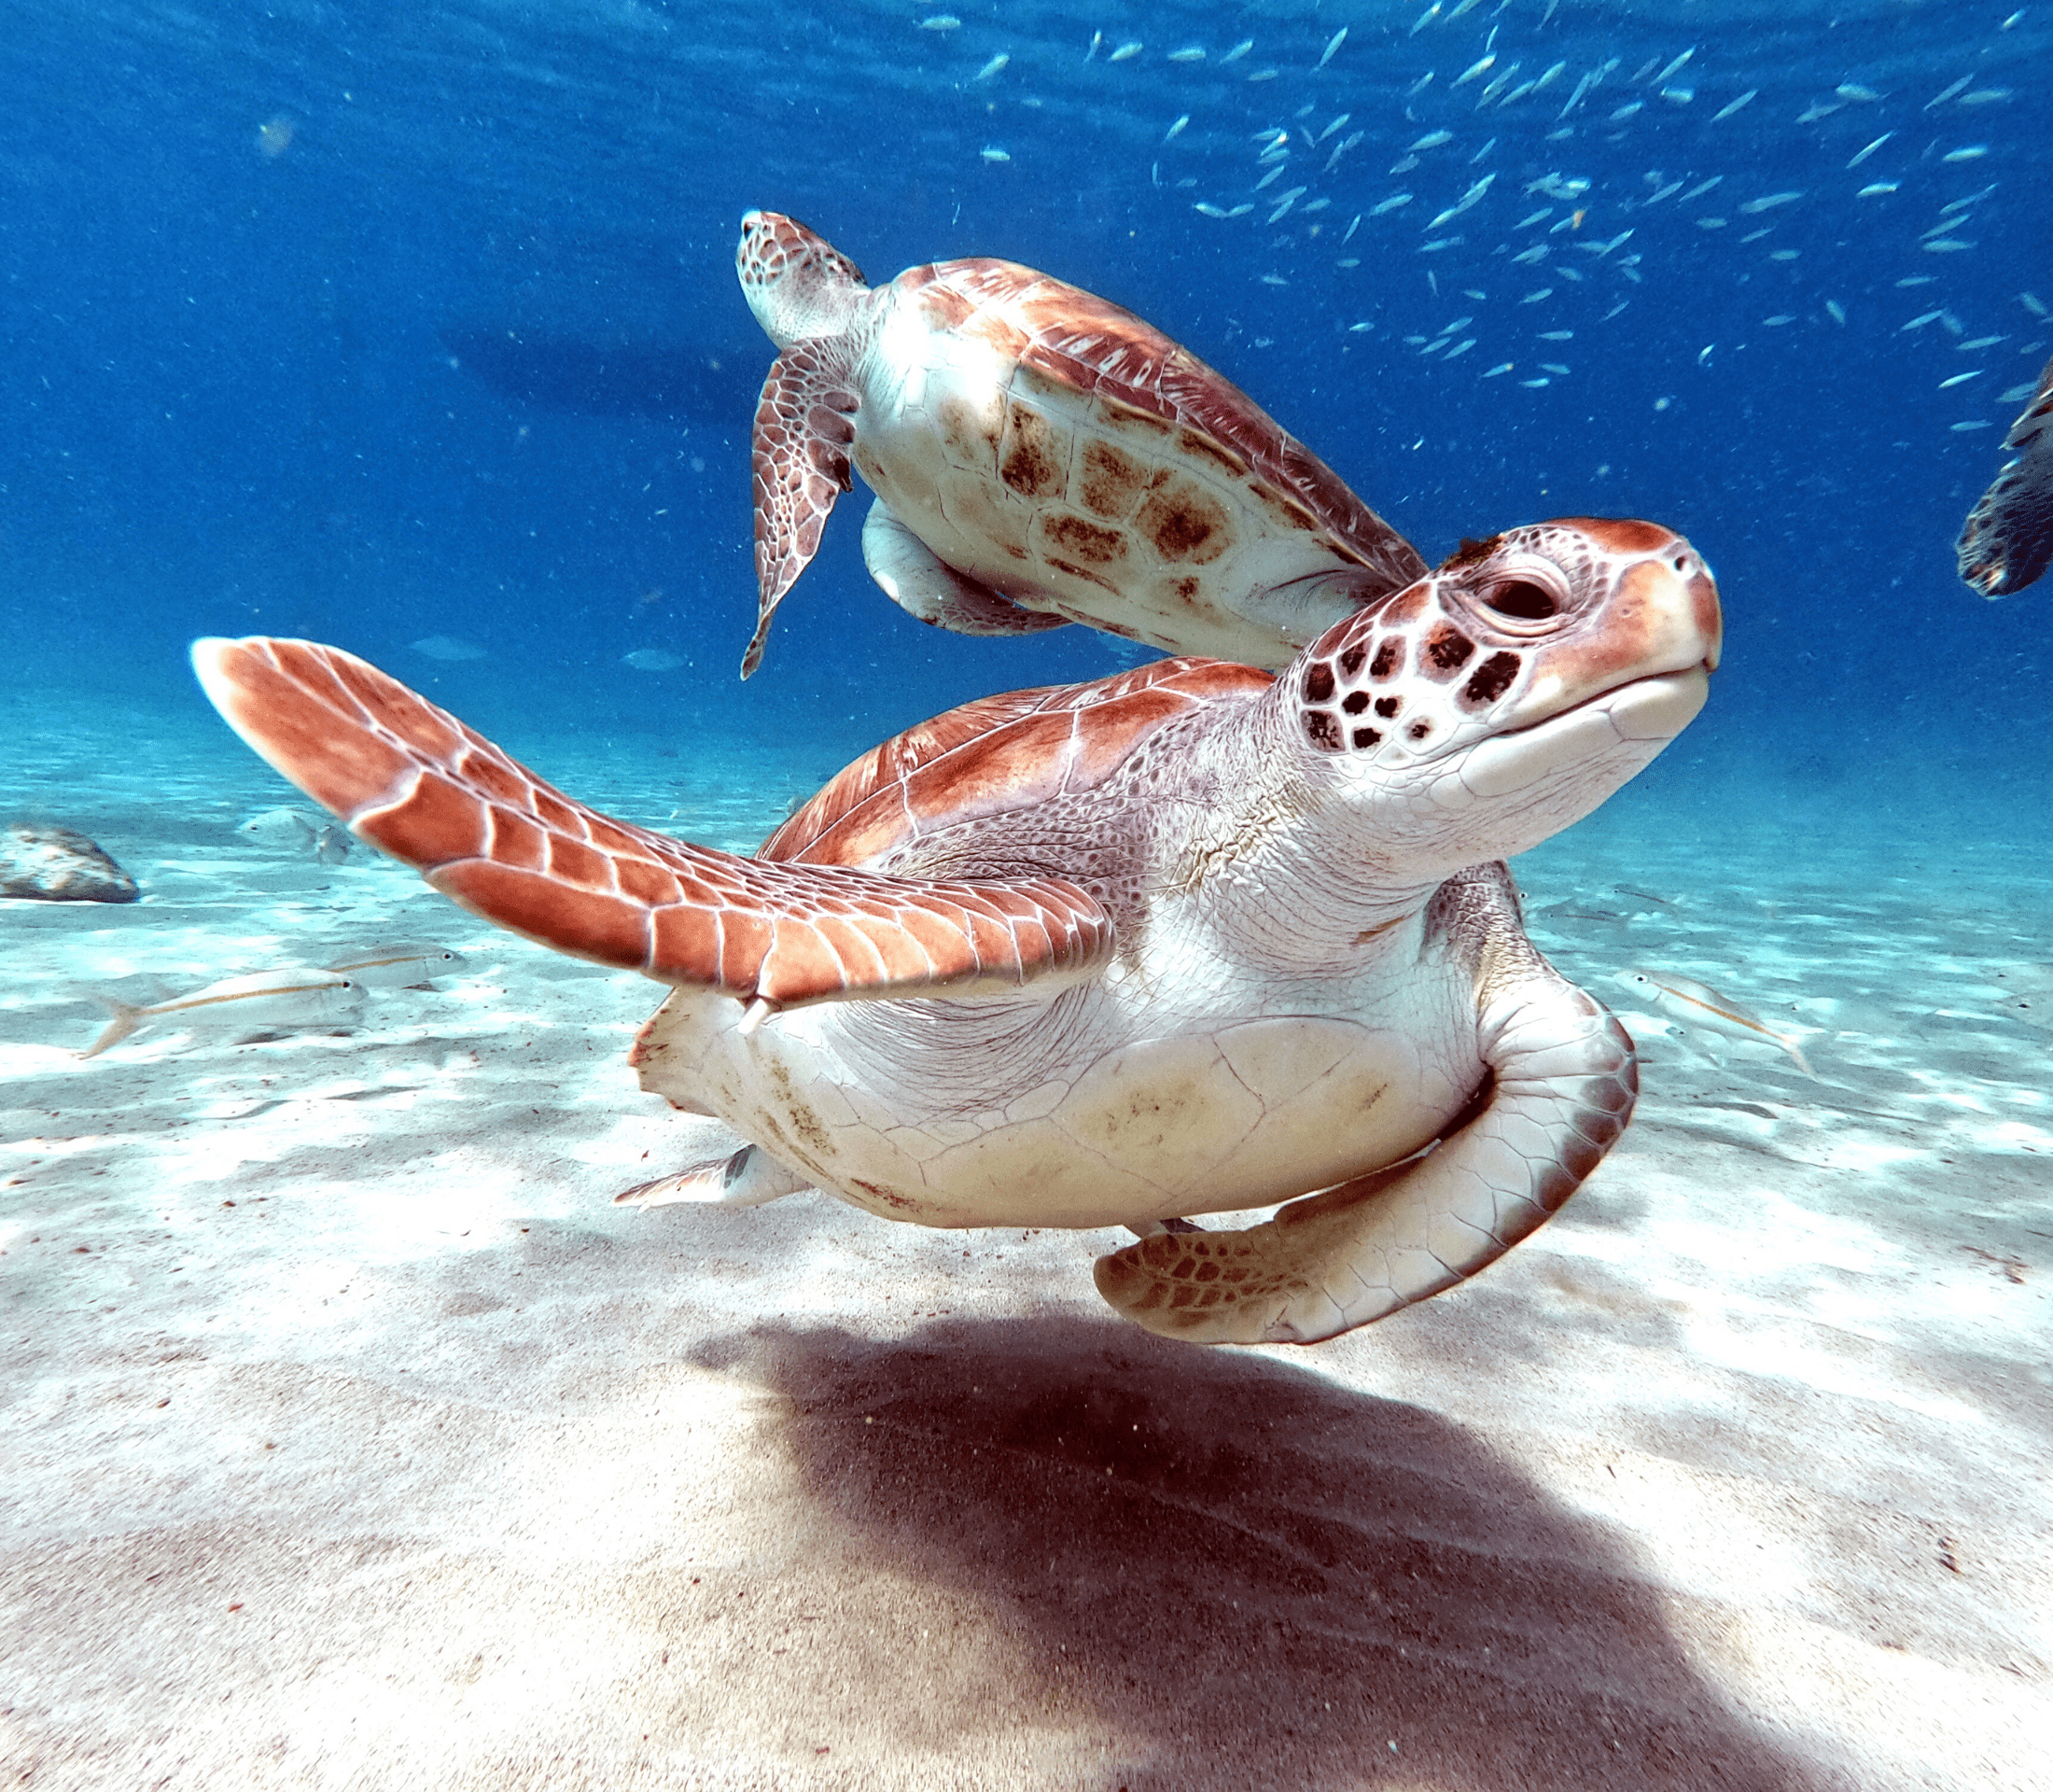 Two turtles swimming near each other